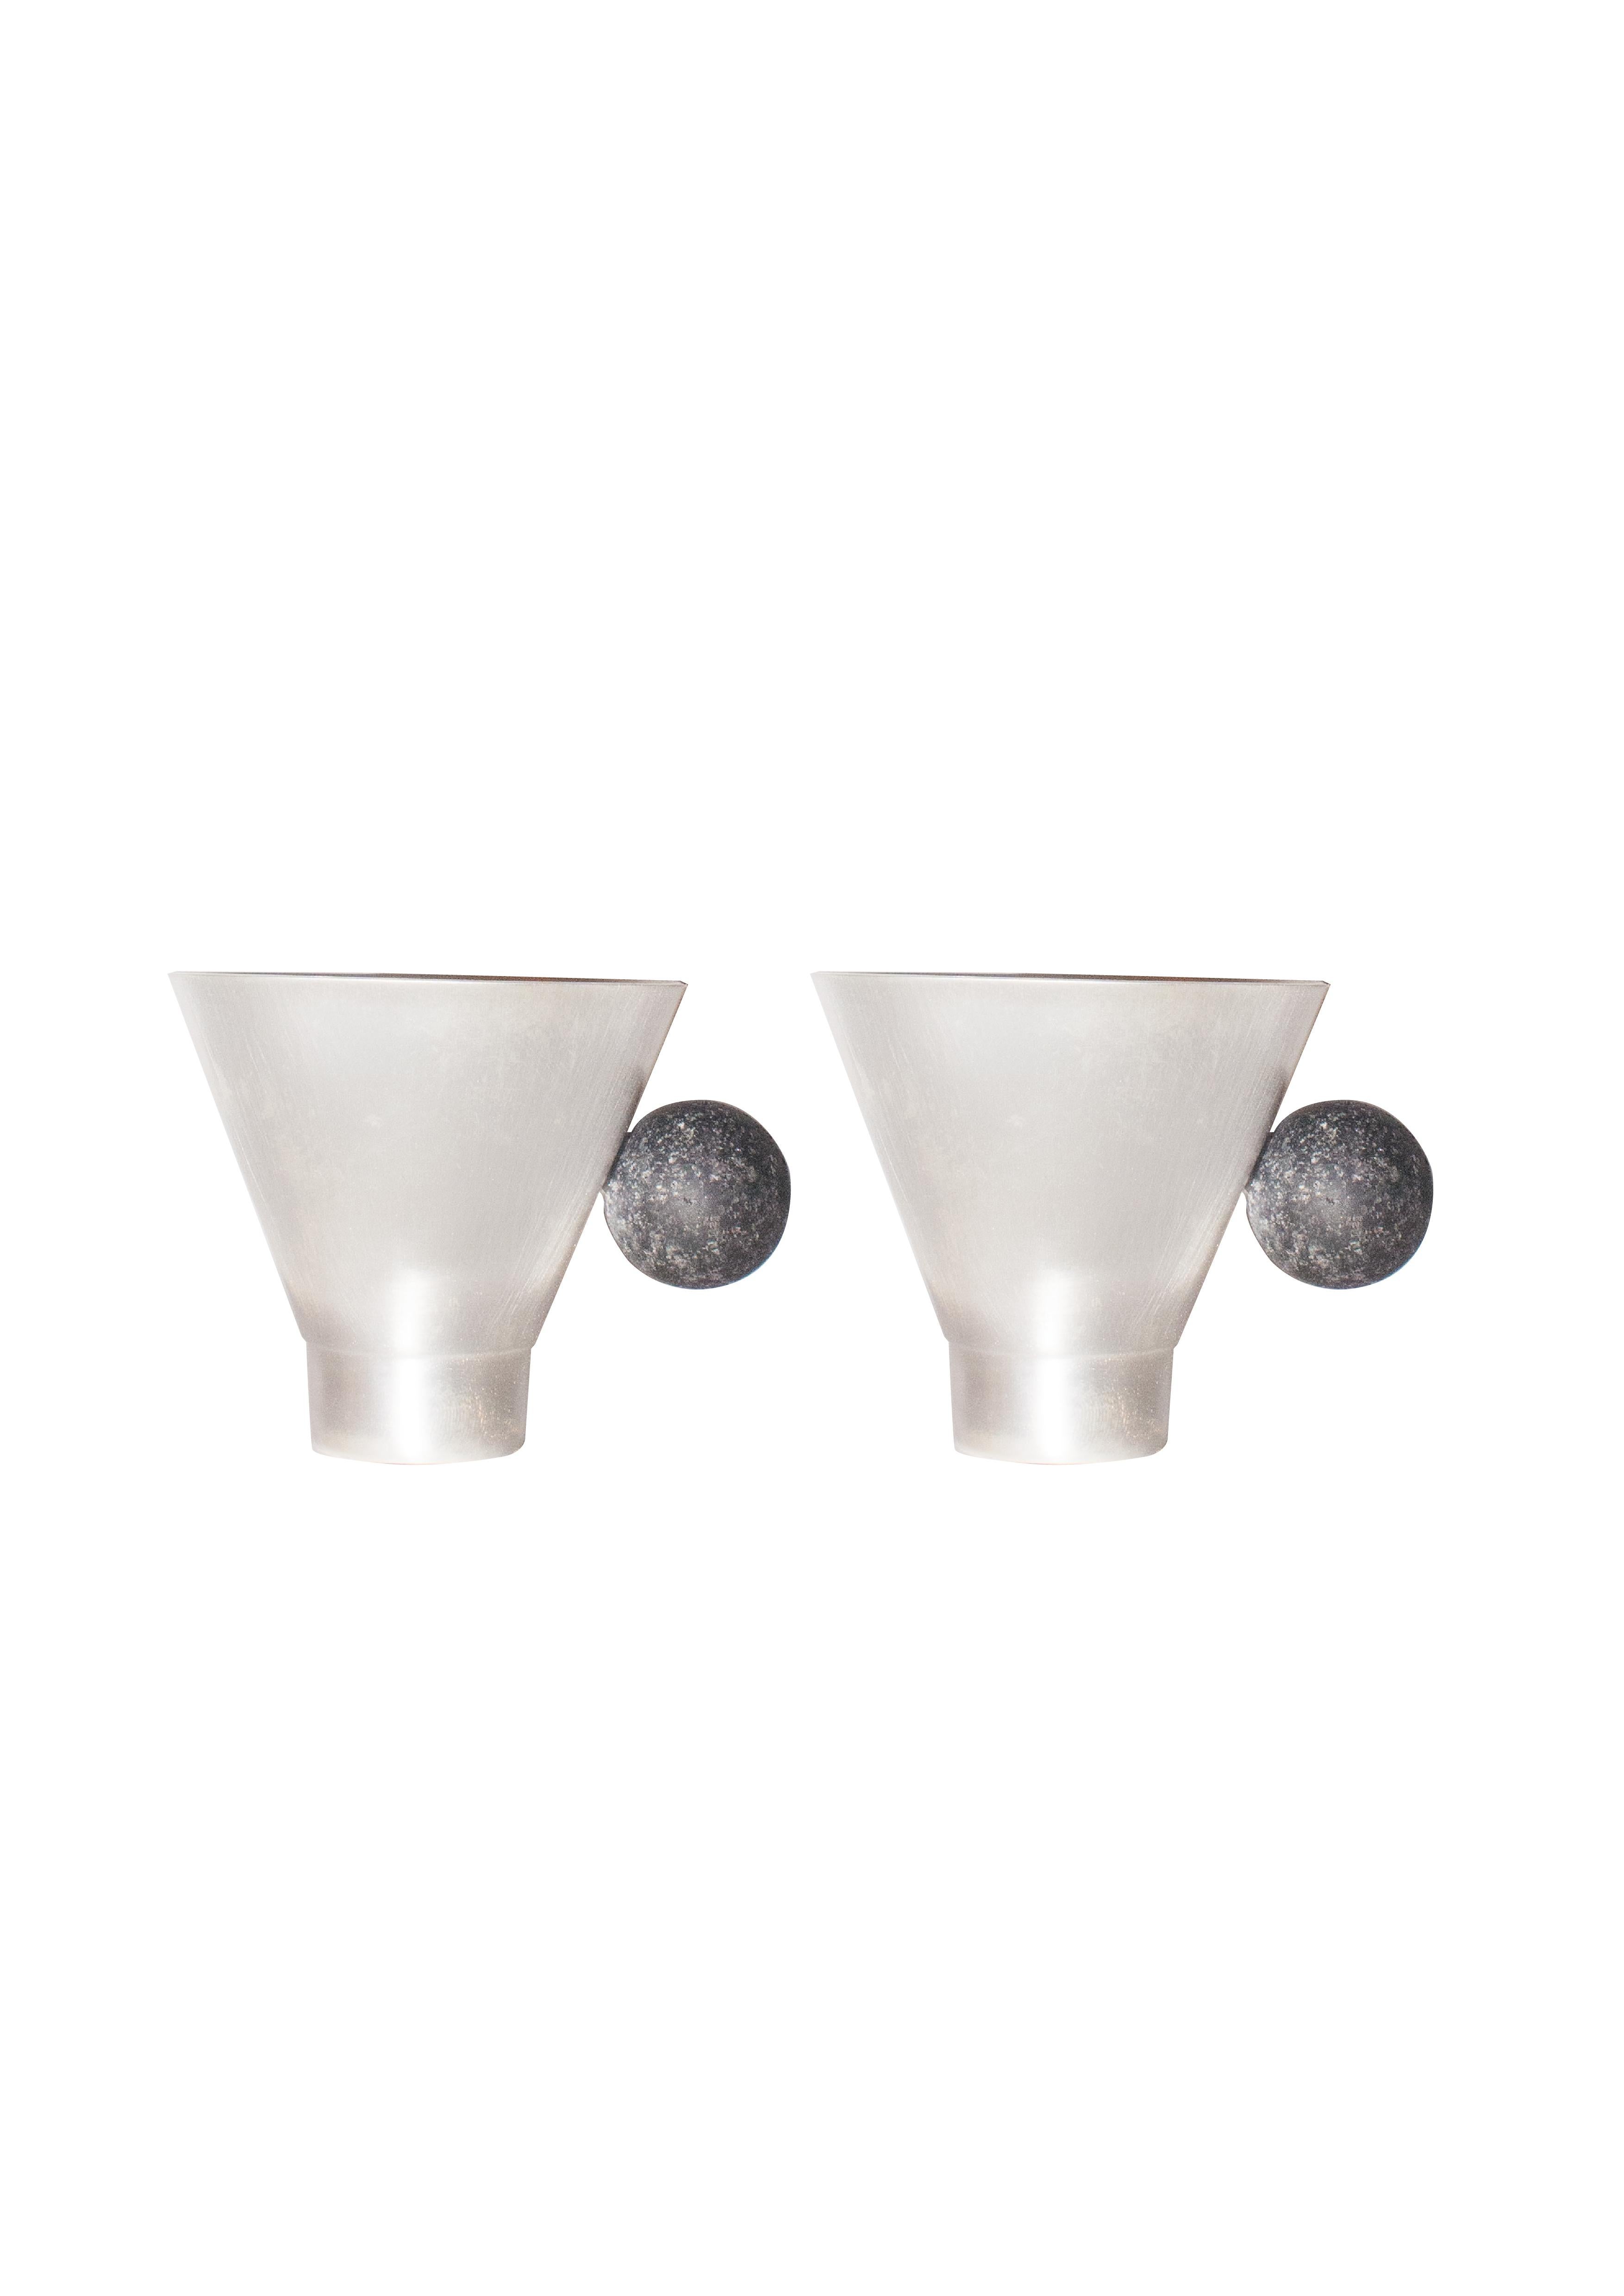  Contemporary Silver Plated Lava Stone Cup Handcrafted Italy by Natalia Criado In New Condition For Sale In Milan, IT